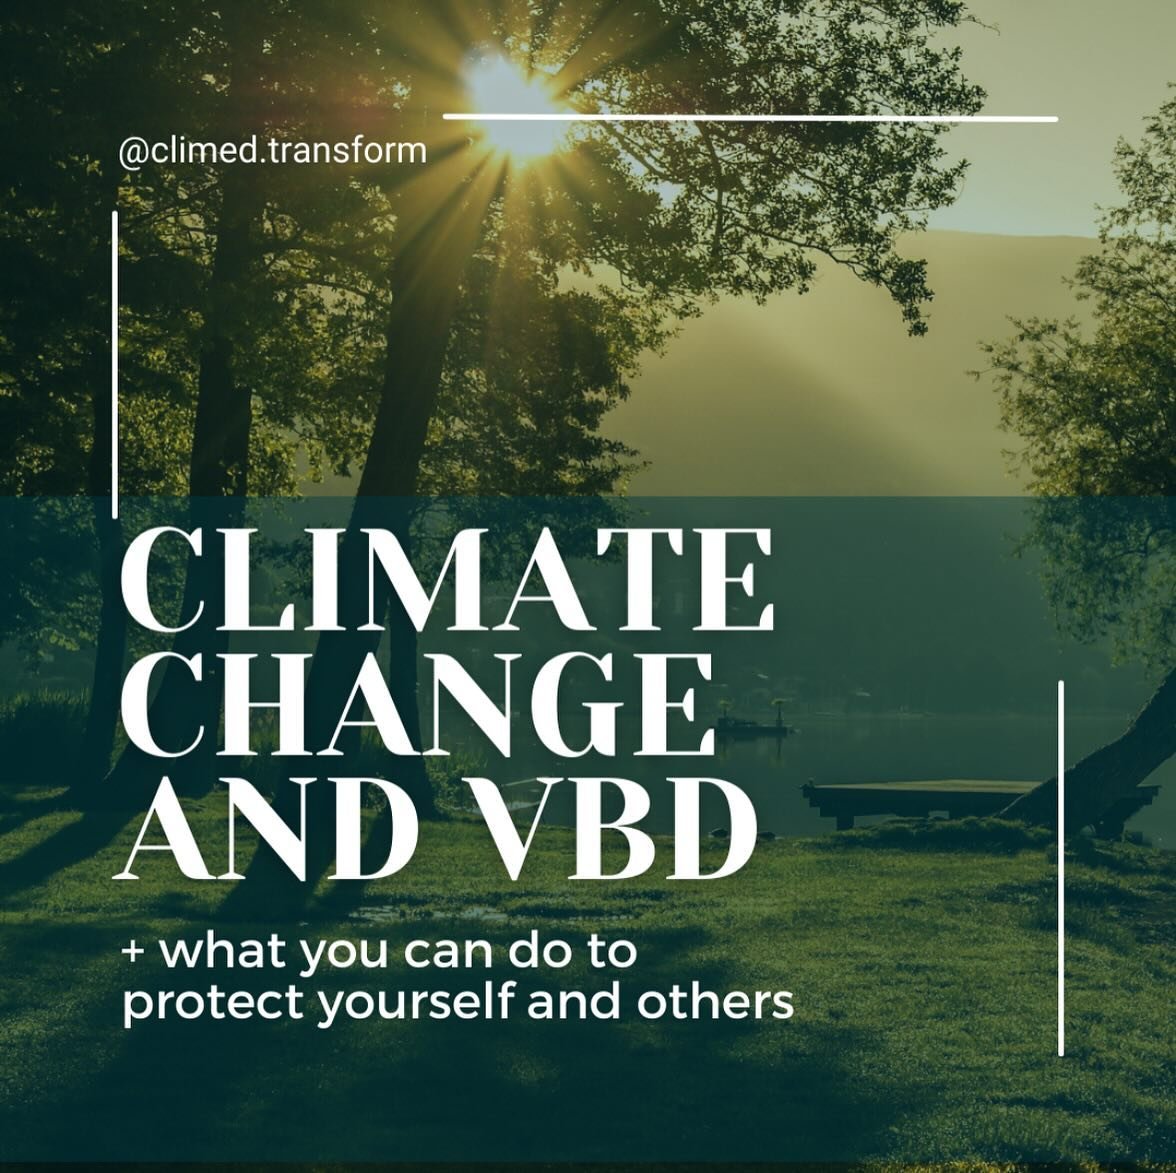 Enjoy reading about some of the environmental health research we&rsquo;re conducting - on Climate Change and Vector Borne Disease! 
#climed #highschool #environmentalhealth #climatechange #publichealth #theclimateclub